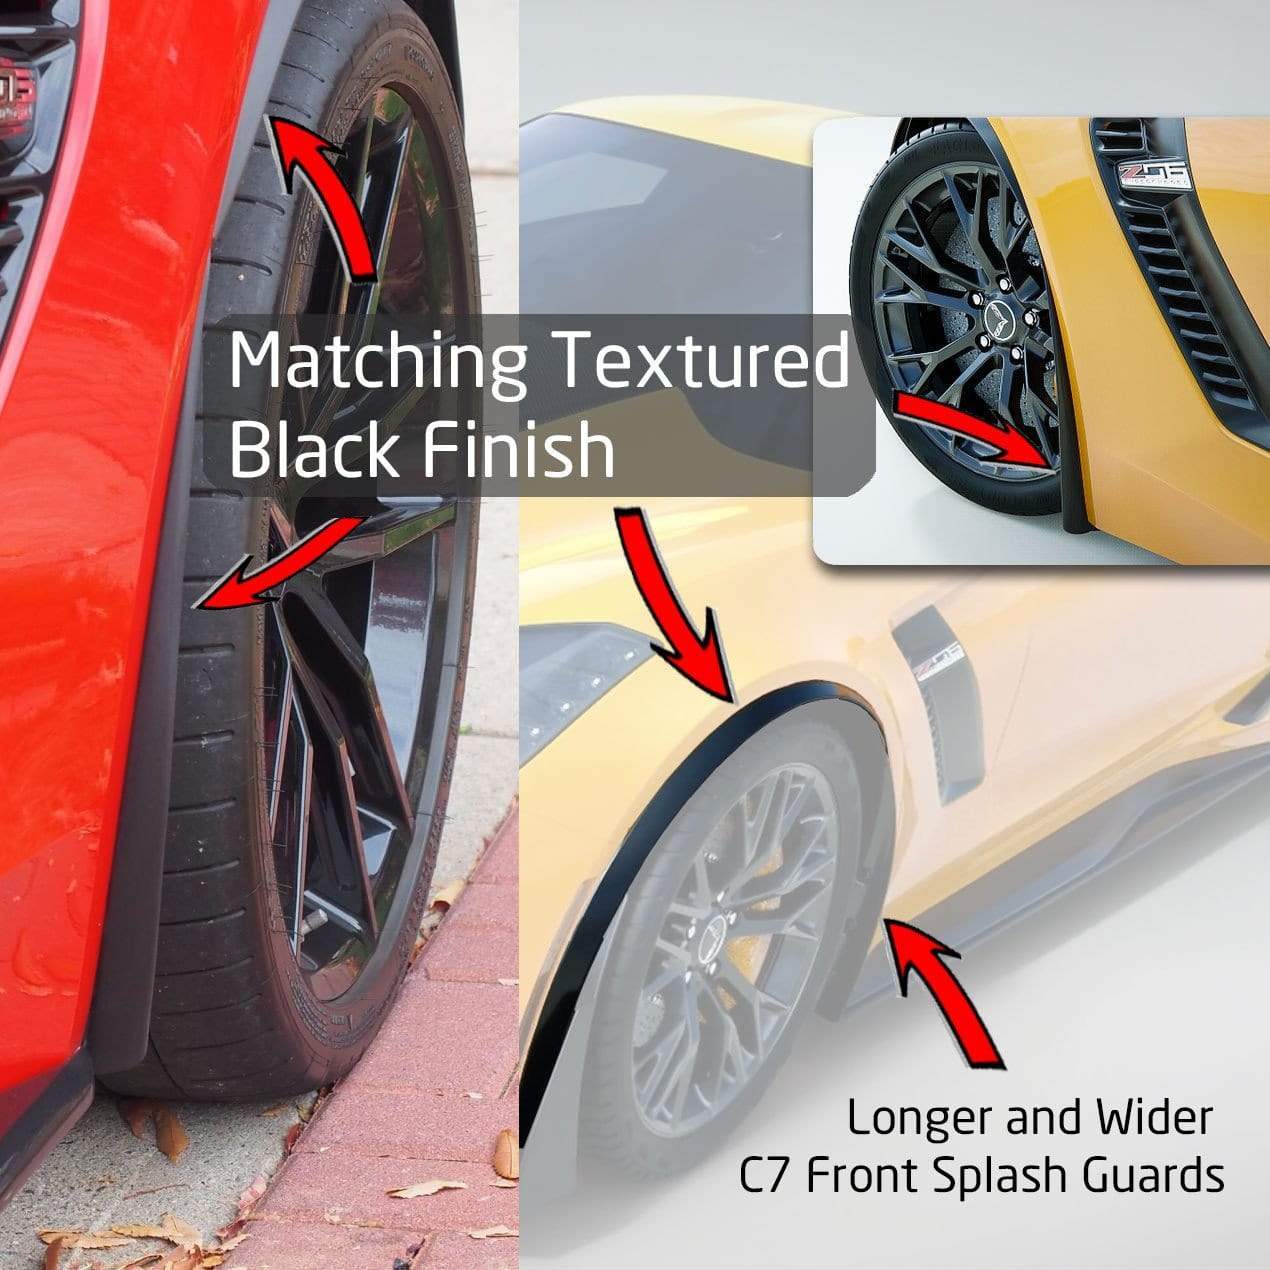 ACS Composite Enhanced Front Splash Guards for Corvette C7, Textured Black, SKU 45-4-063, providing superior protection against paint chipping and erosion.